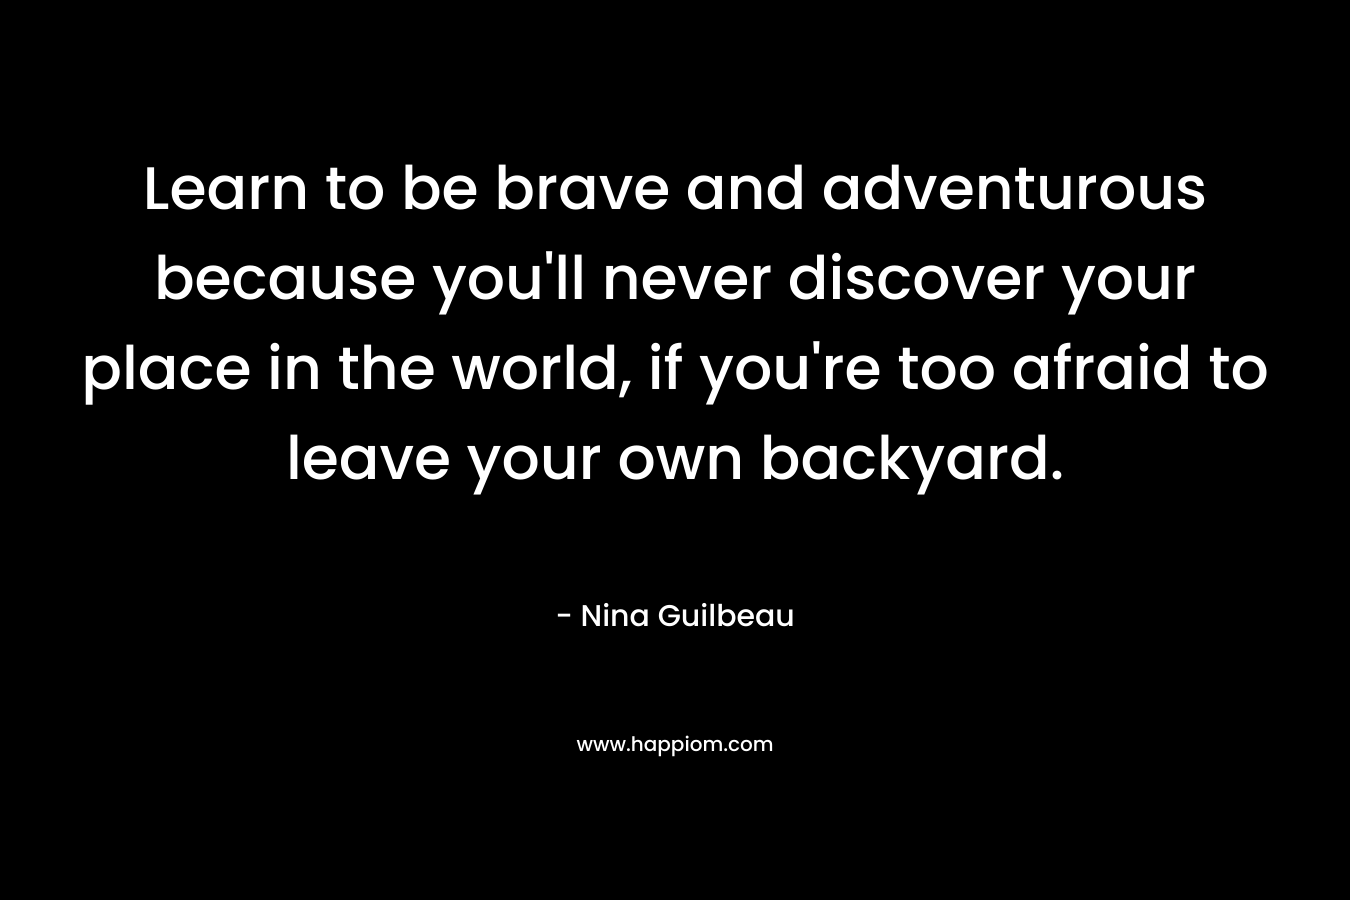 Learn to be brave and adventurous because you'll never discover your place in the world, if you're too afraid to leave your own backyard.